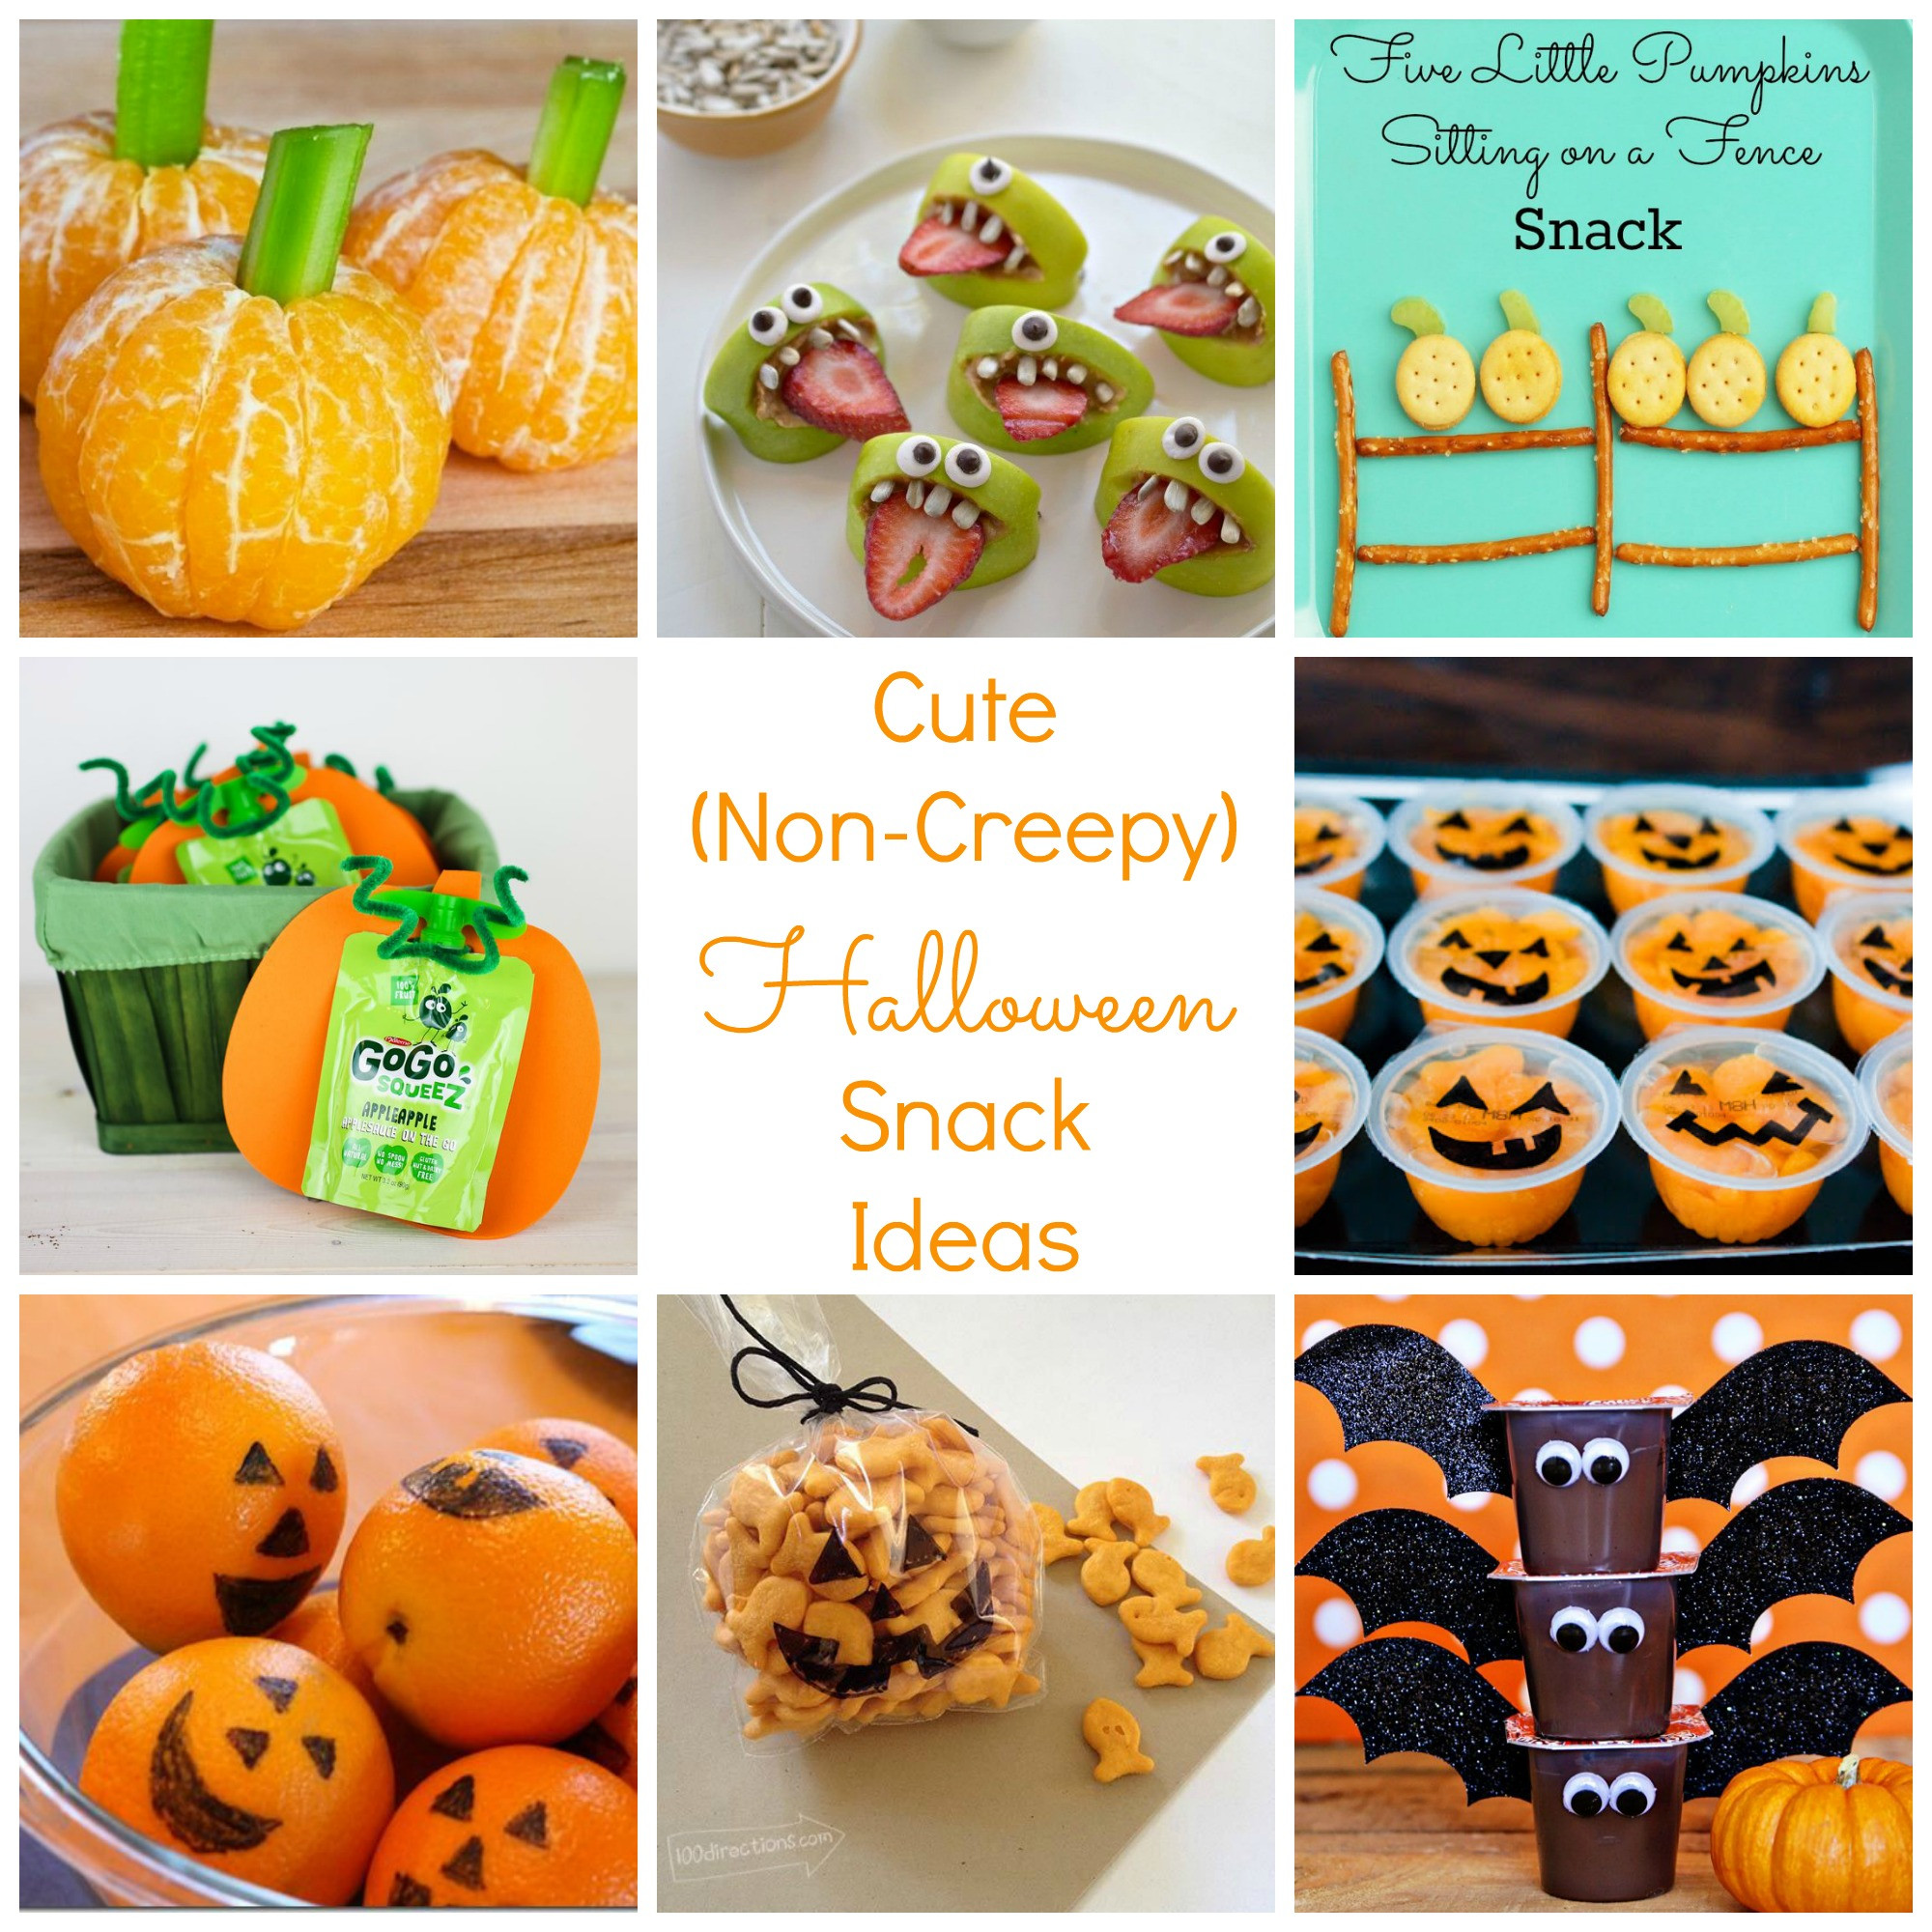 Halloween Snack Ideas For Kids Party
 Cute Non Creepy Halloween and Fall Snack Ideas Happy